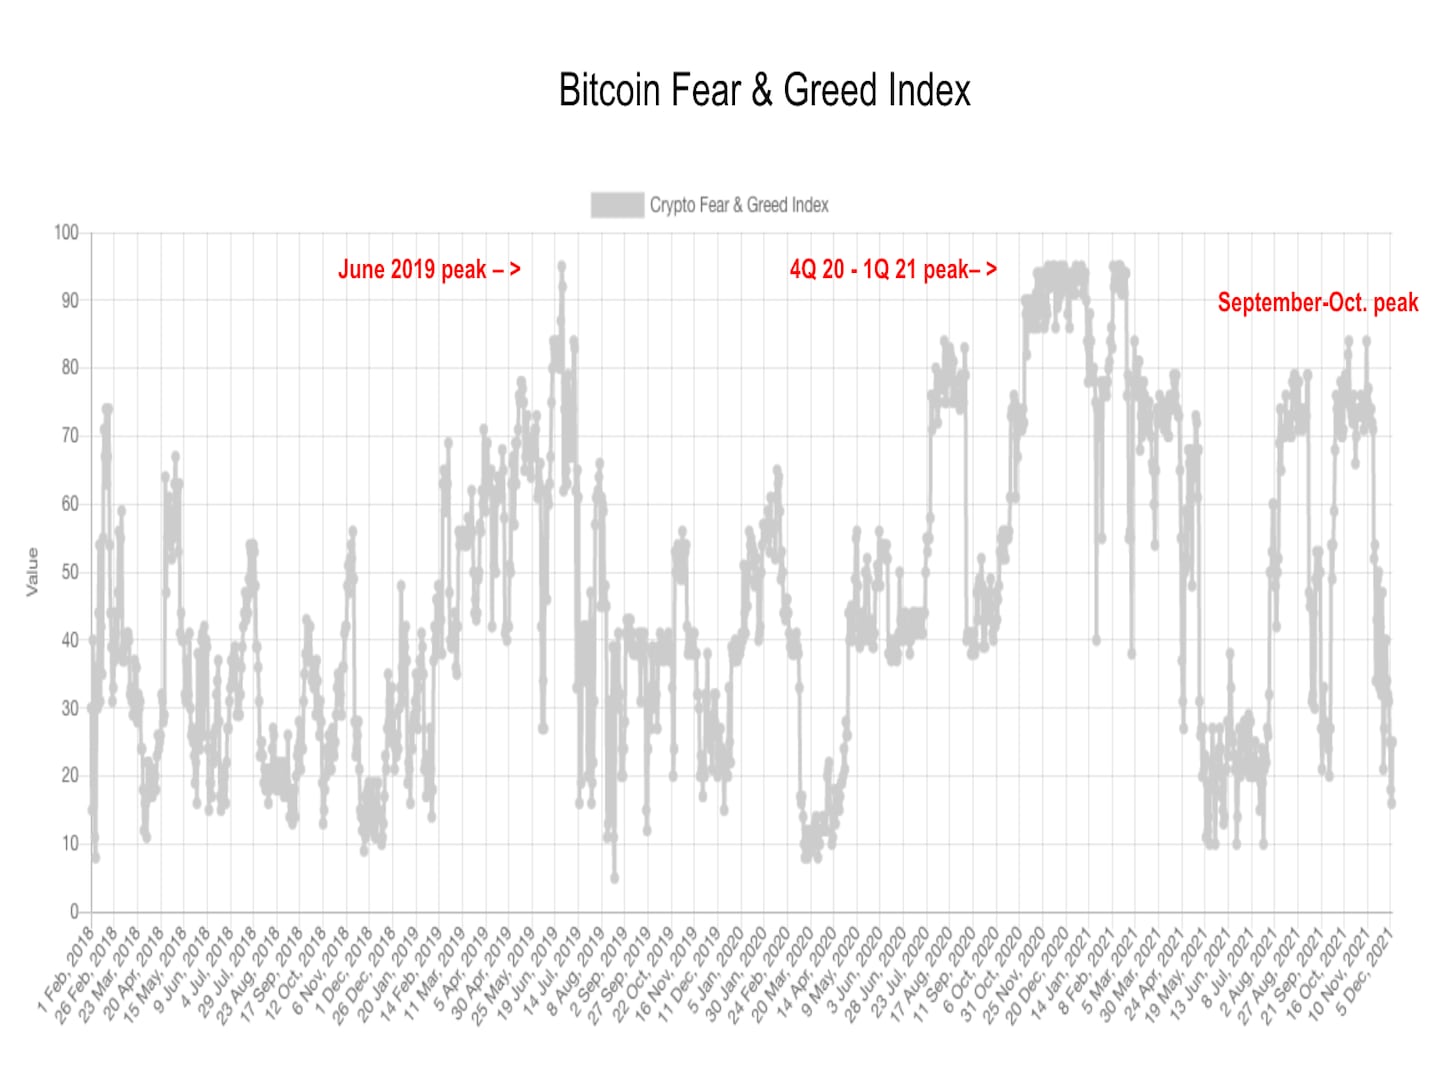 Bitcoin fear & greed index (CoinDesk, Alternative.me)